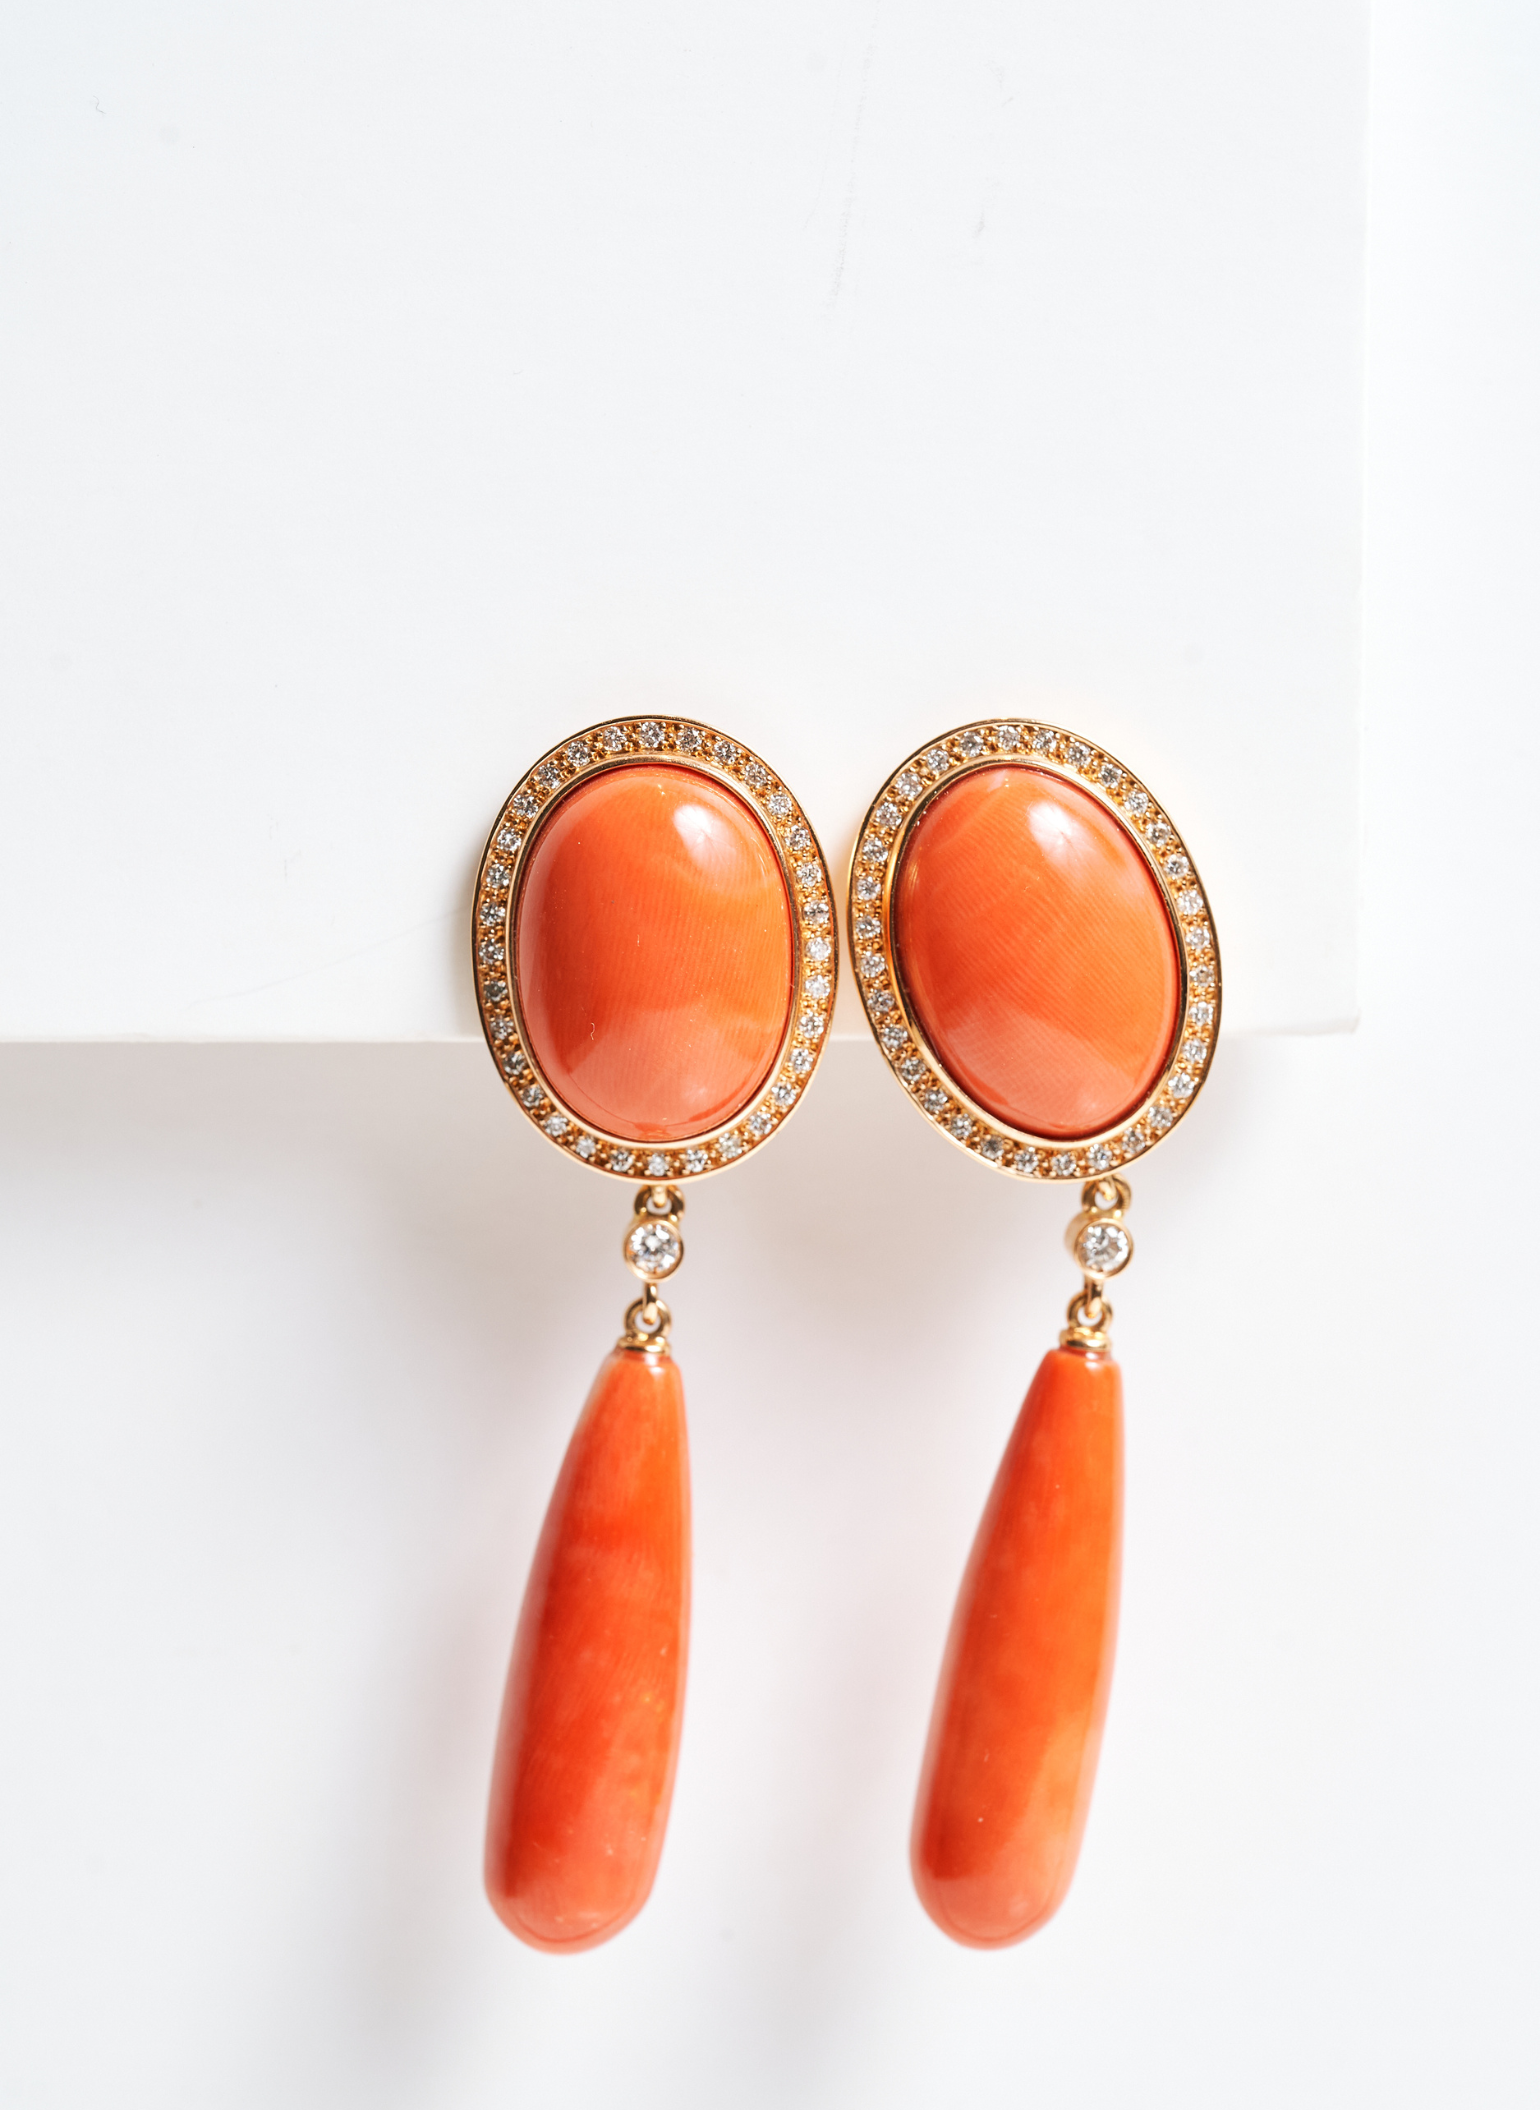 Coral Tribute Earrings with Brilliant Cut Diamonds